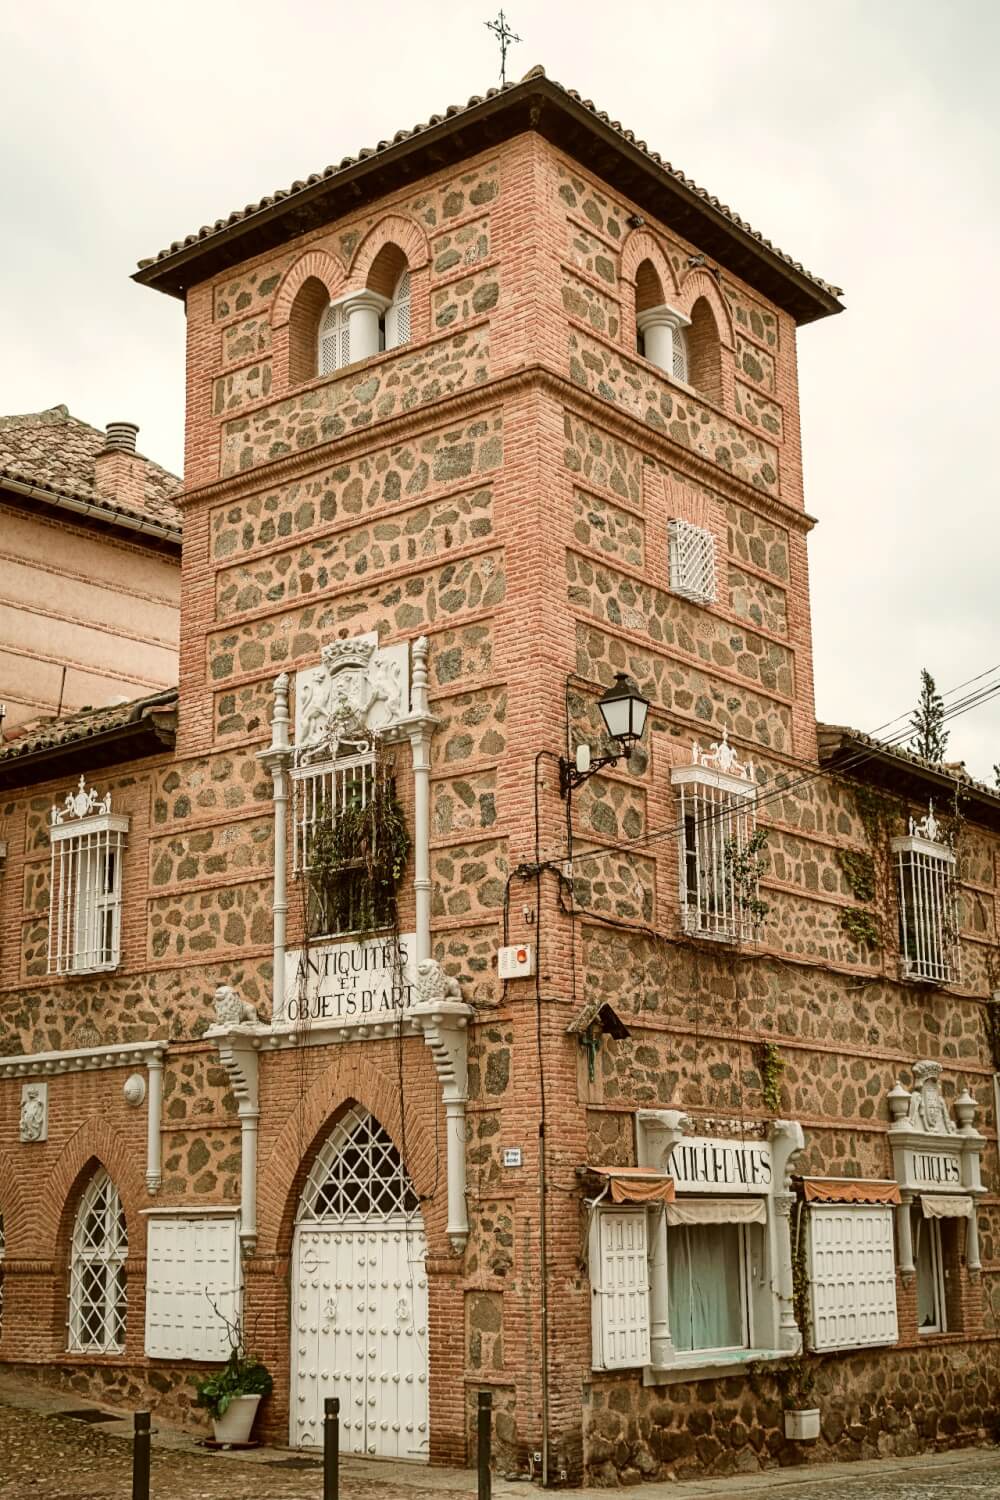 A square stone tower with arched doors and windows. The sigh out front is in French, and translates to "Antiques and works of art"